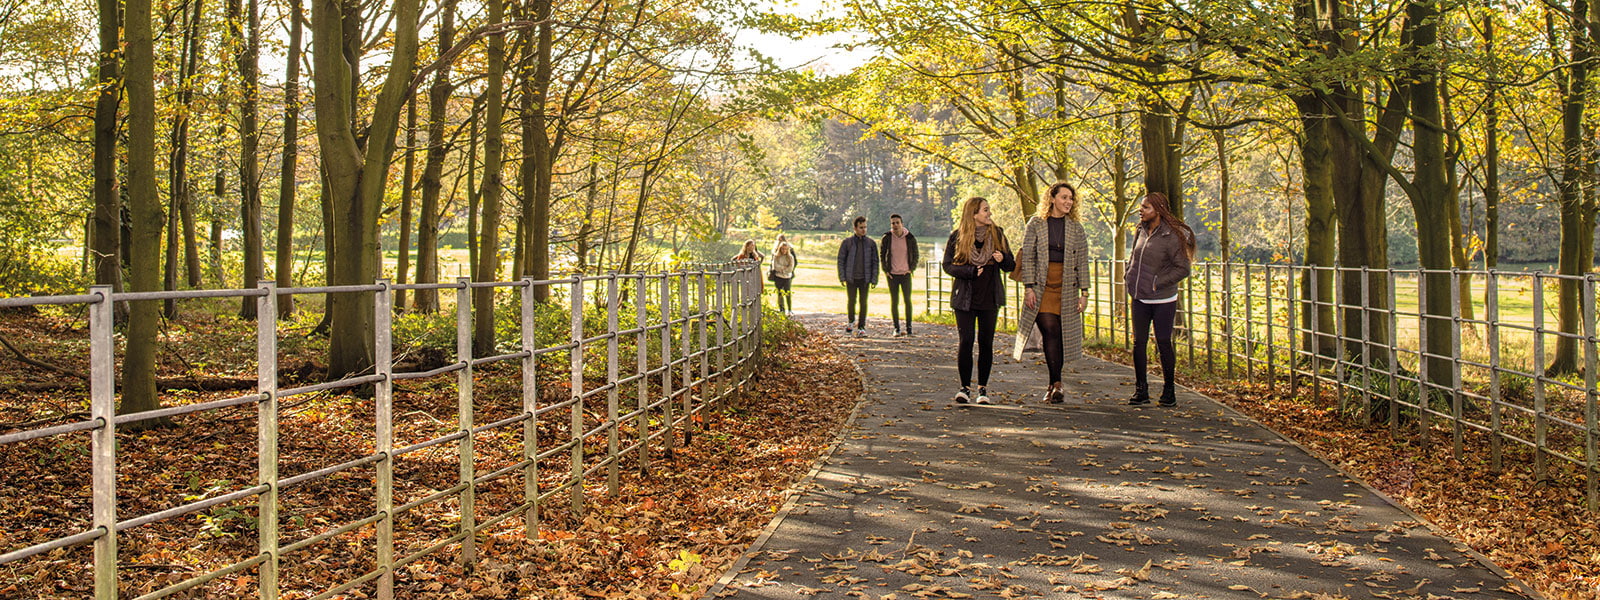 Students walking towards us on a path through woodland on a sunny autumn day